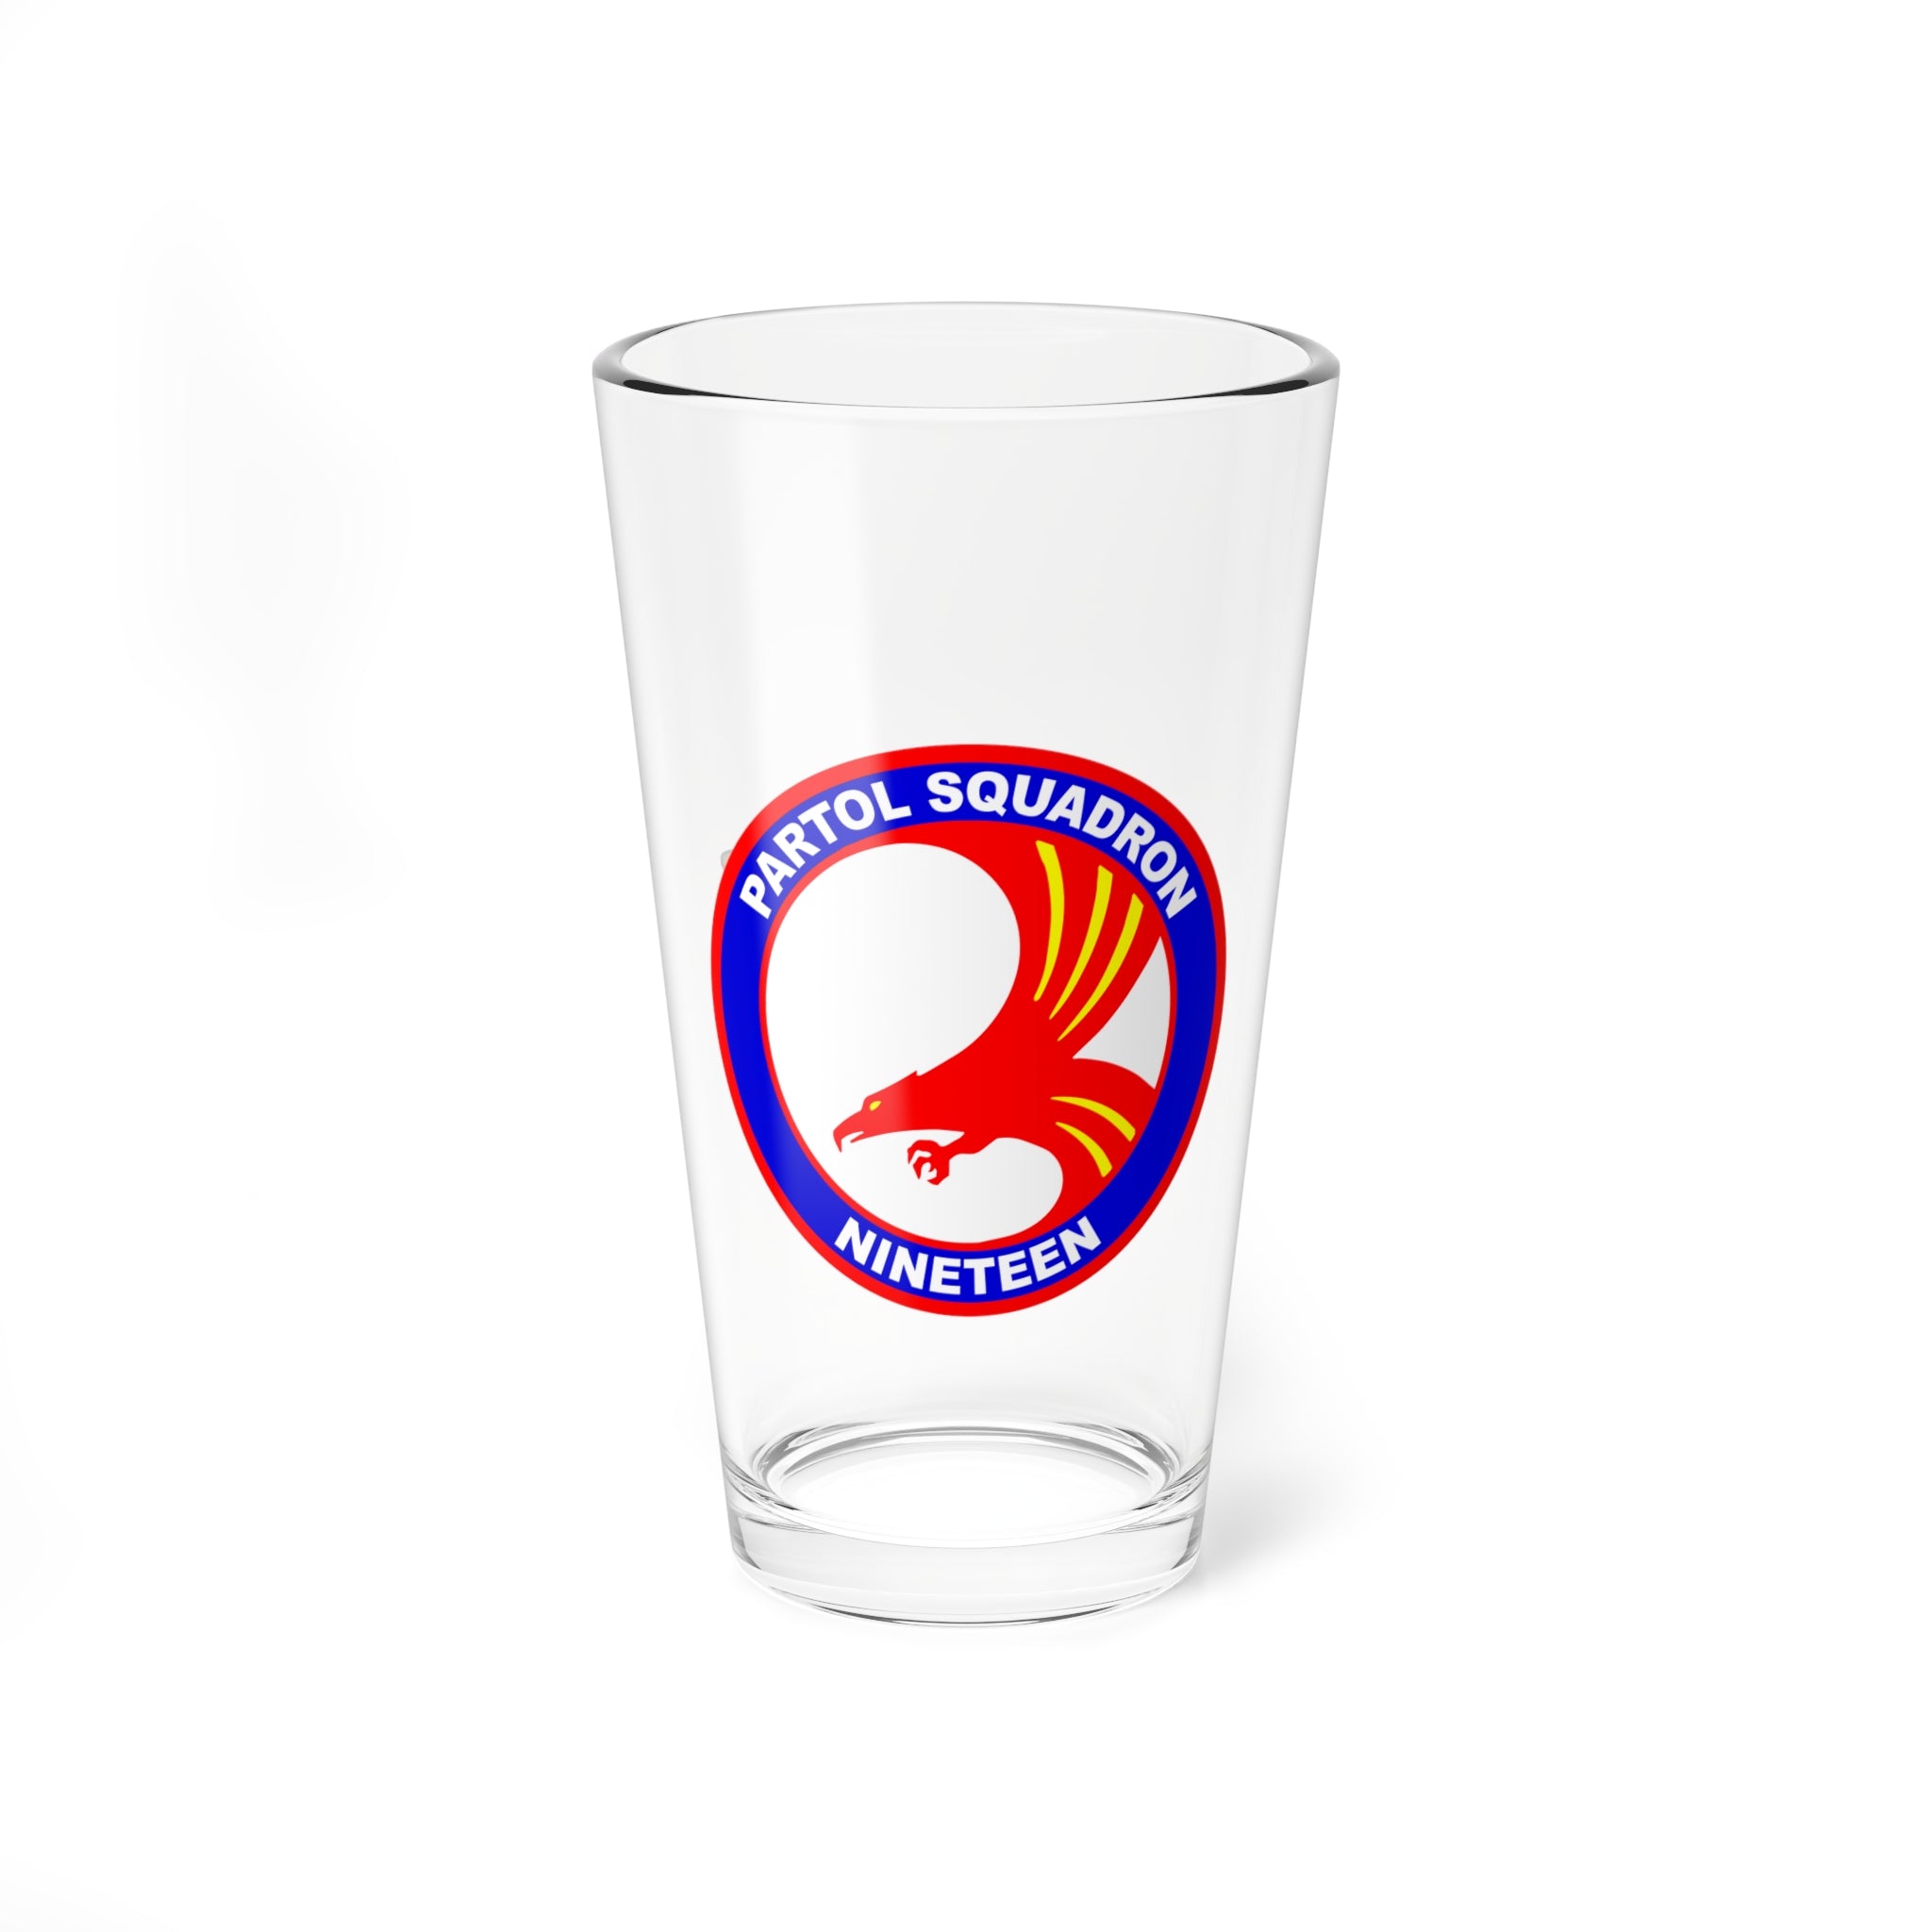 VP-19 "Big Red" Aviator Pint Glass US Navy Patrol Squadron flying the P-2 Neptune and P-3 Orion for retired and veteran Sailors.